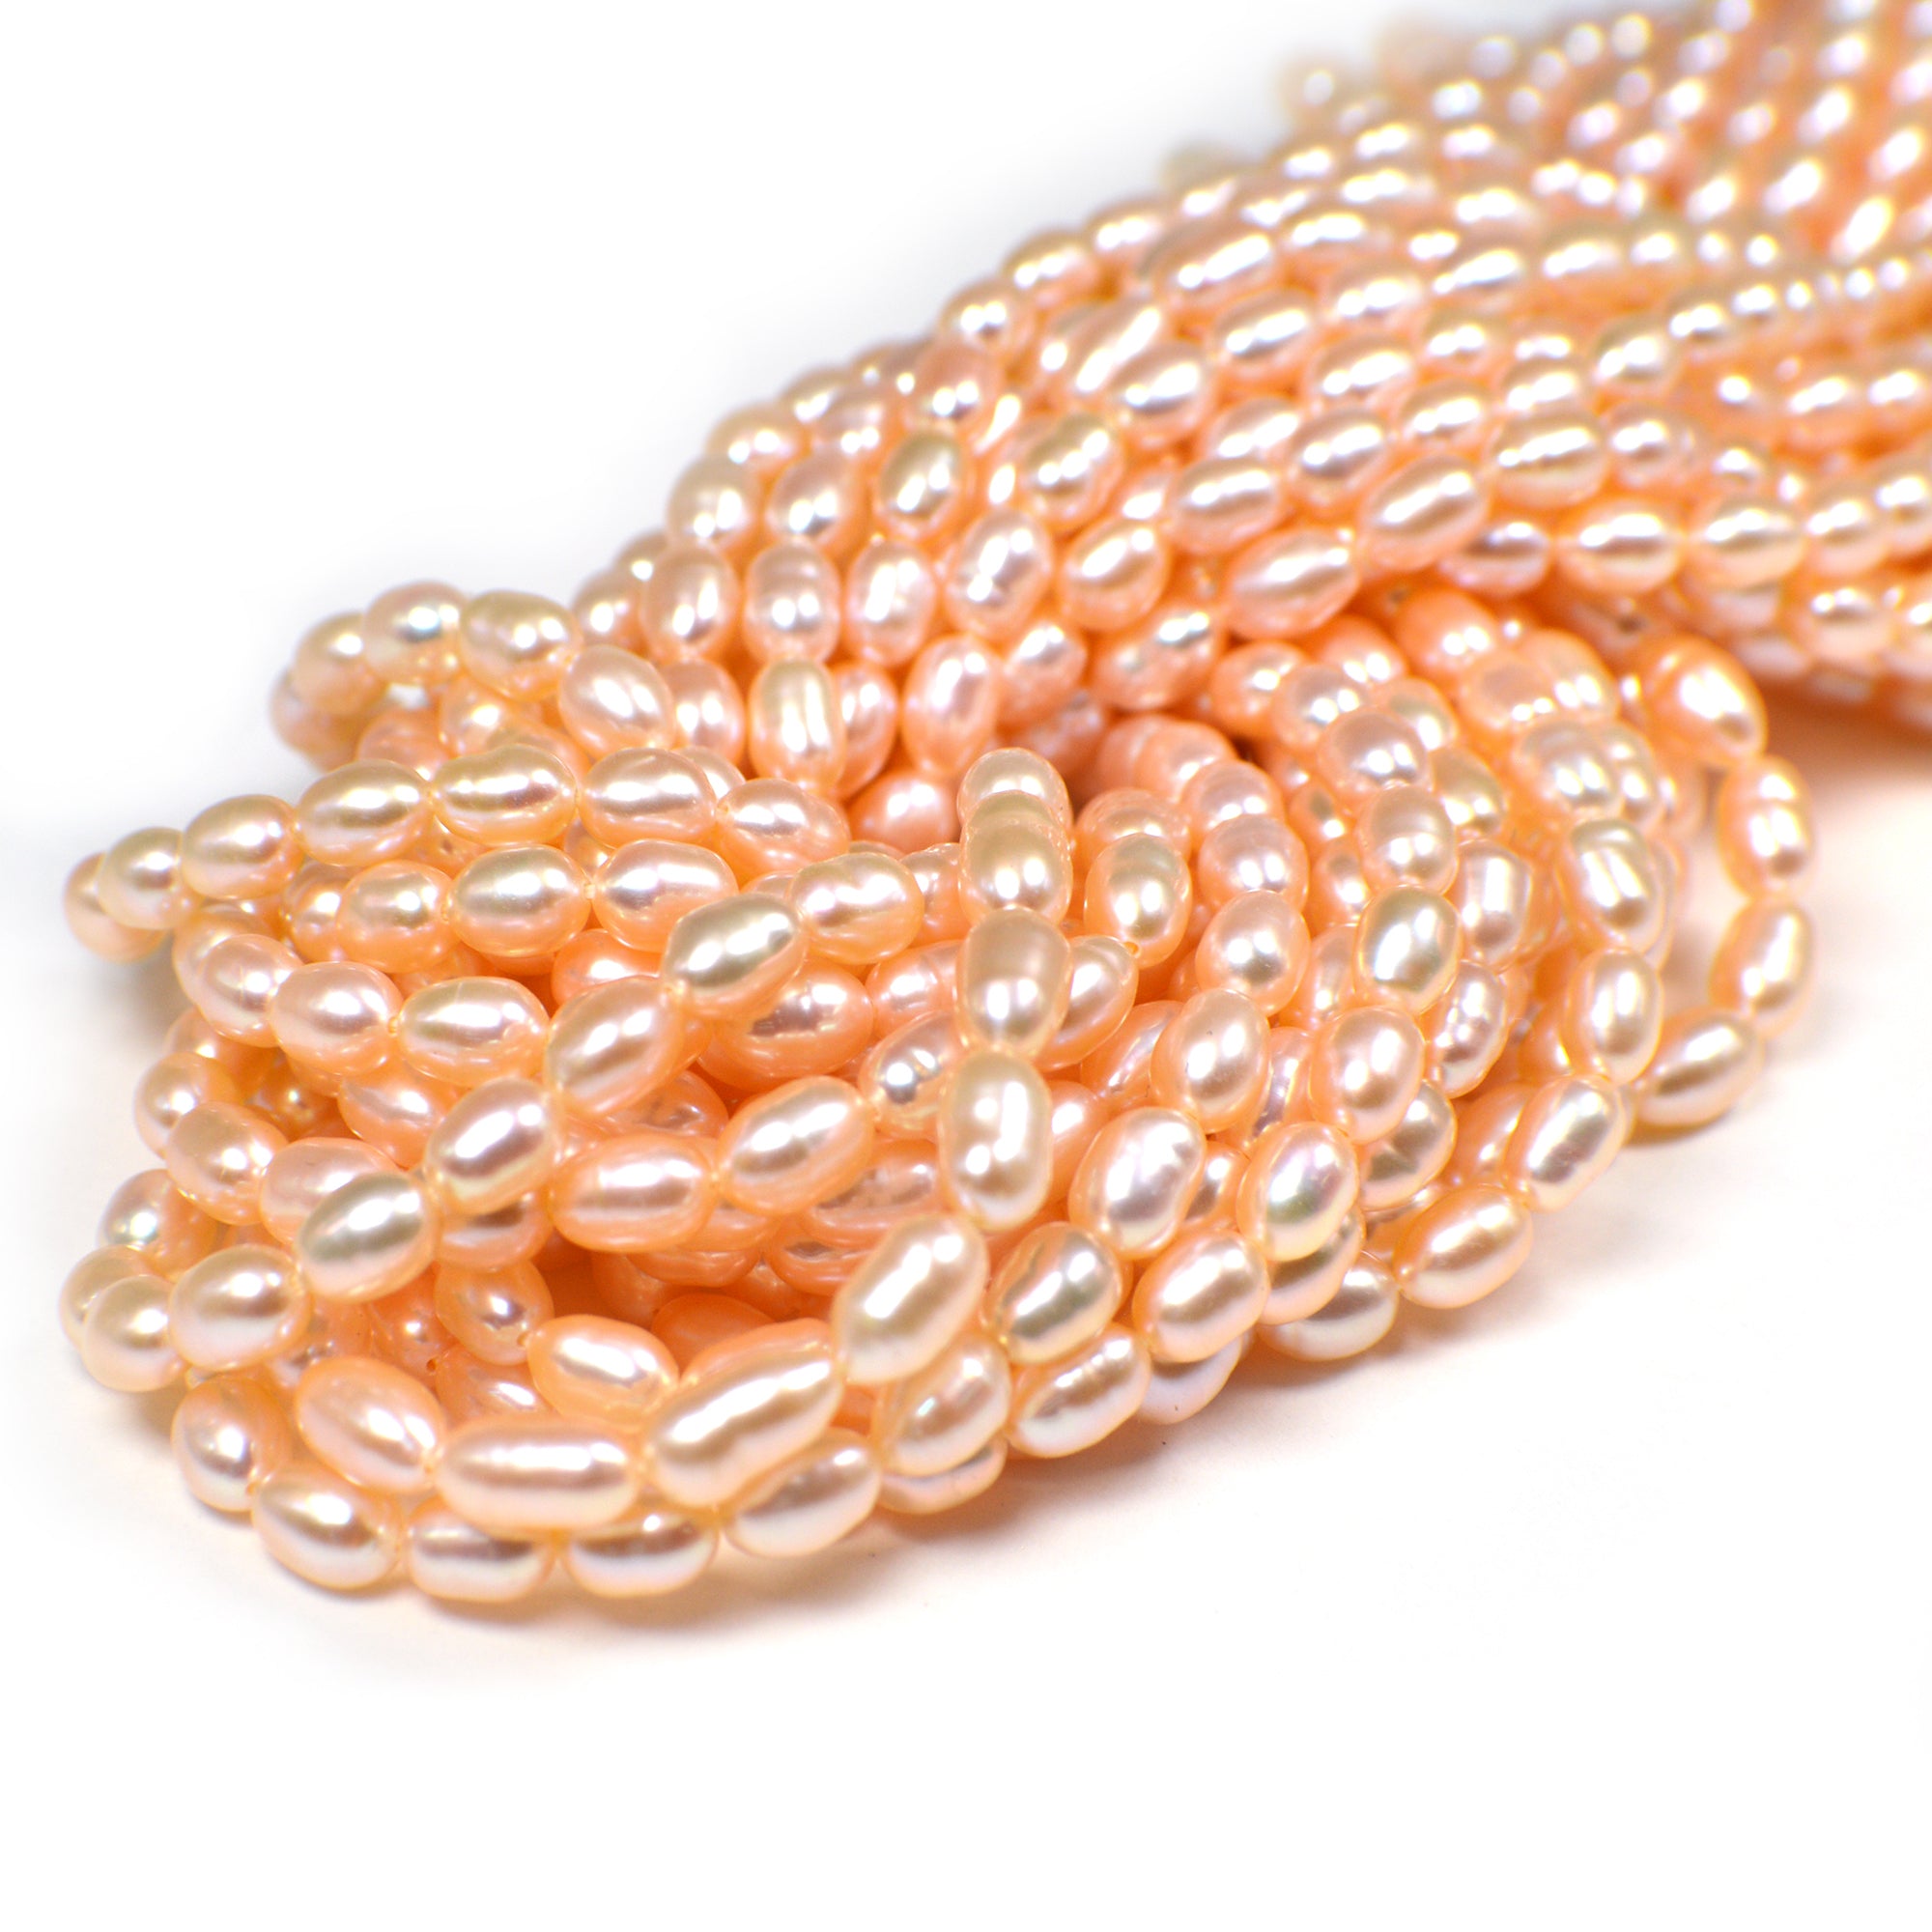 6.5x5.5 - 7.5x5.5 MM Light Peach Rice / Oval Freshwater Pearls Beads